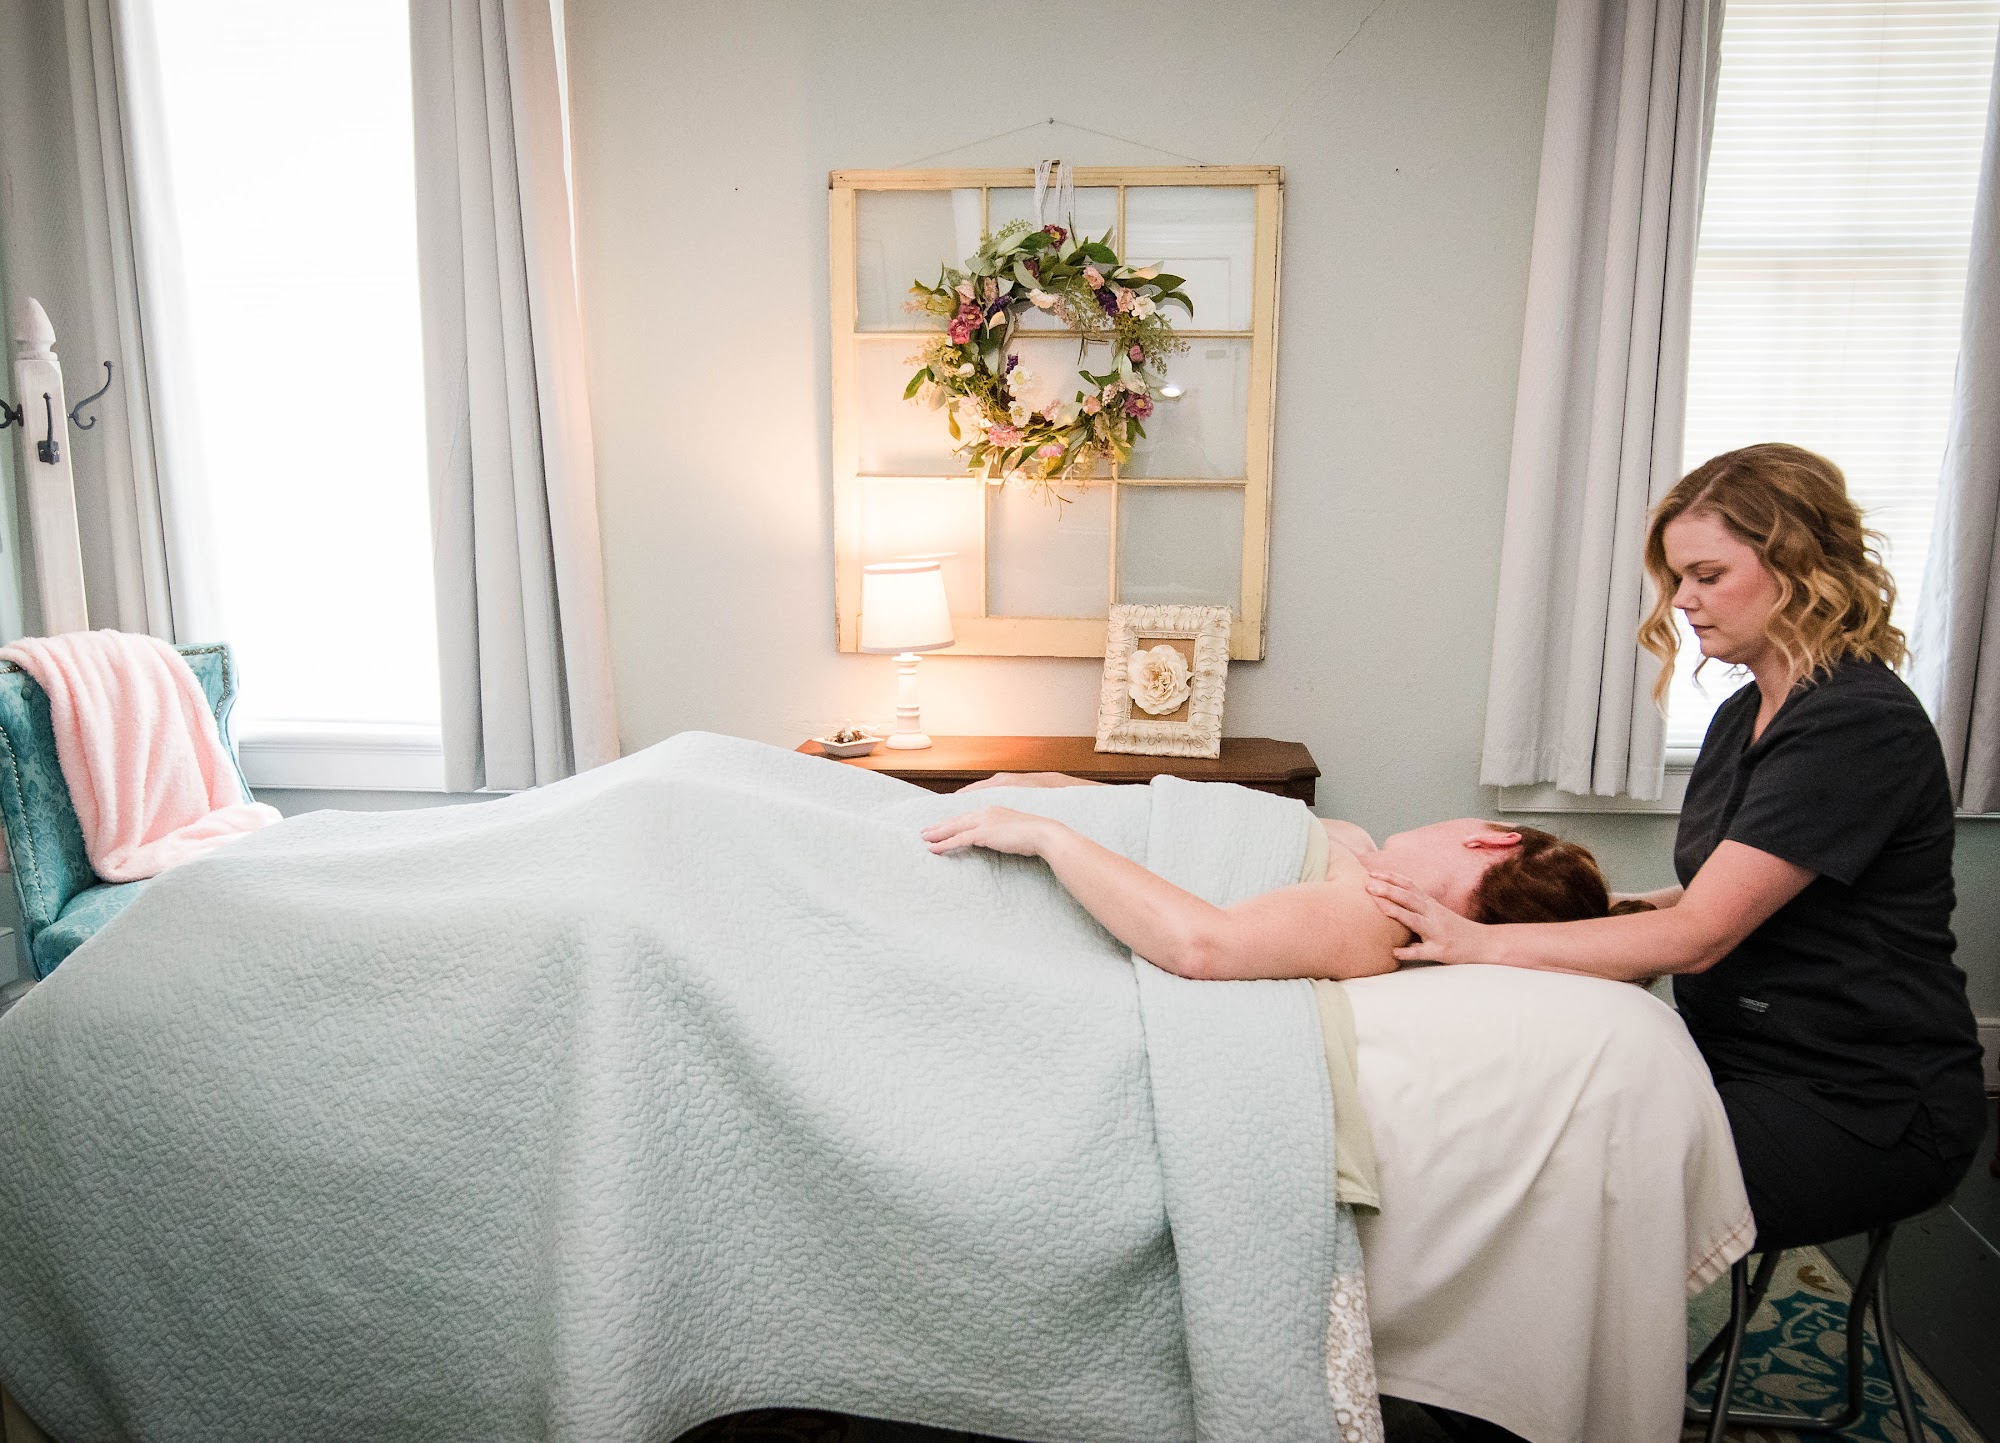 Chattahoochee Valley Therapeutic Massage inside of Uptown Spa & Suites